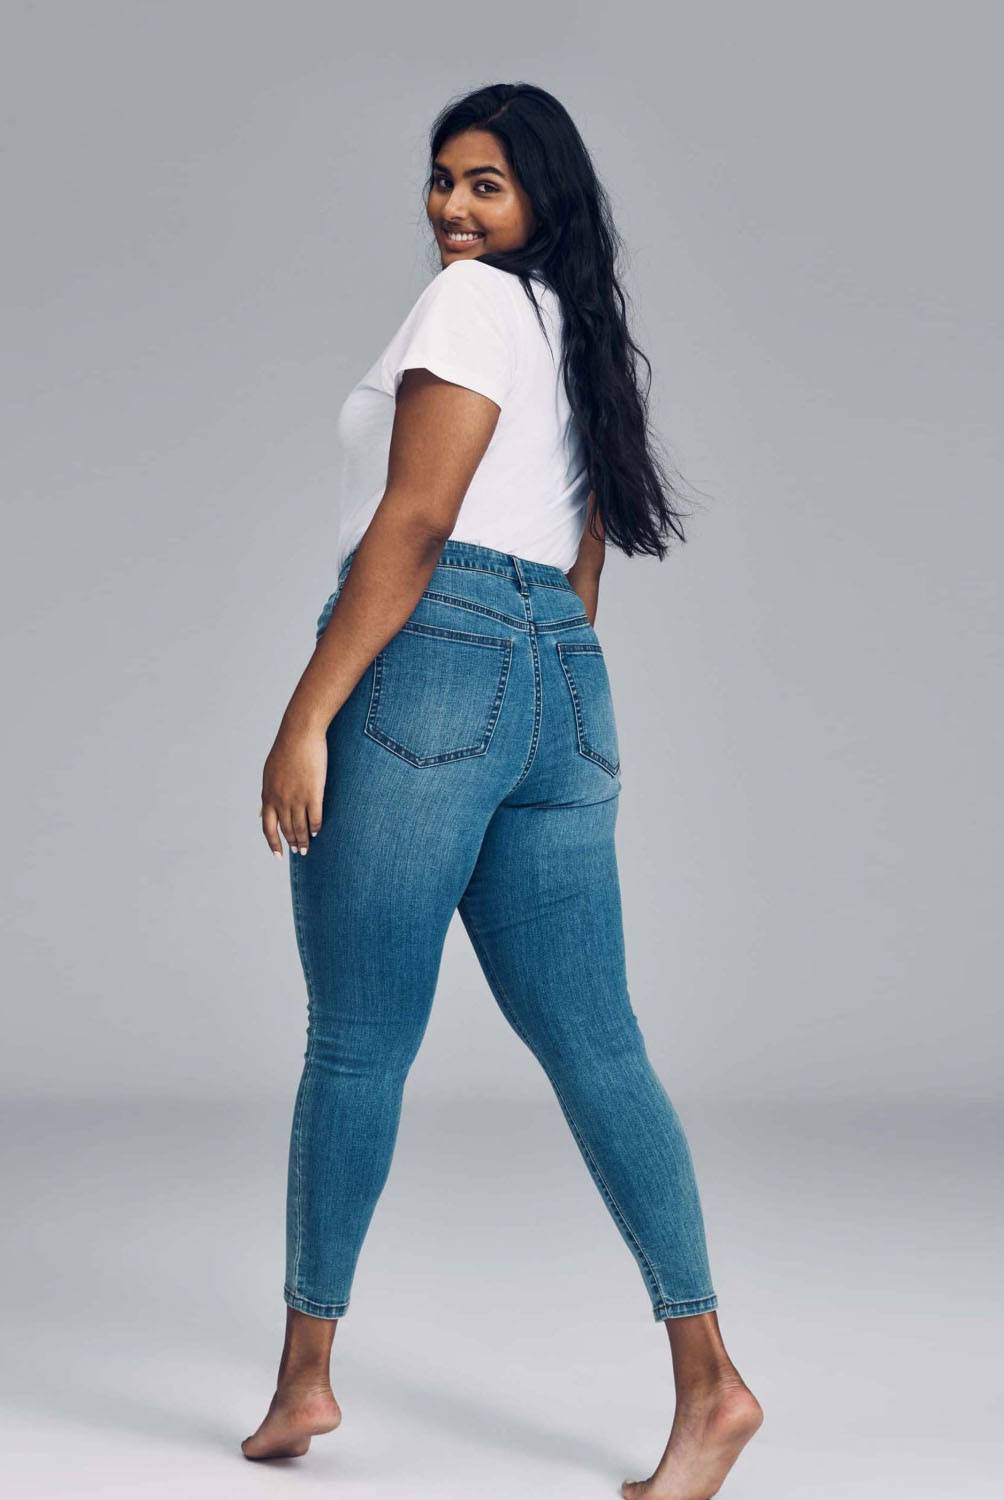 COTTON ON - Jeans Curve High Rise Skinny Mujer Cotton On